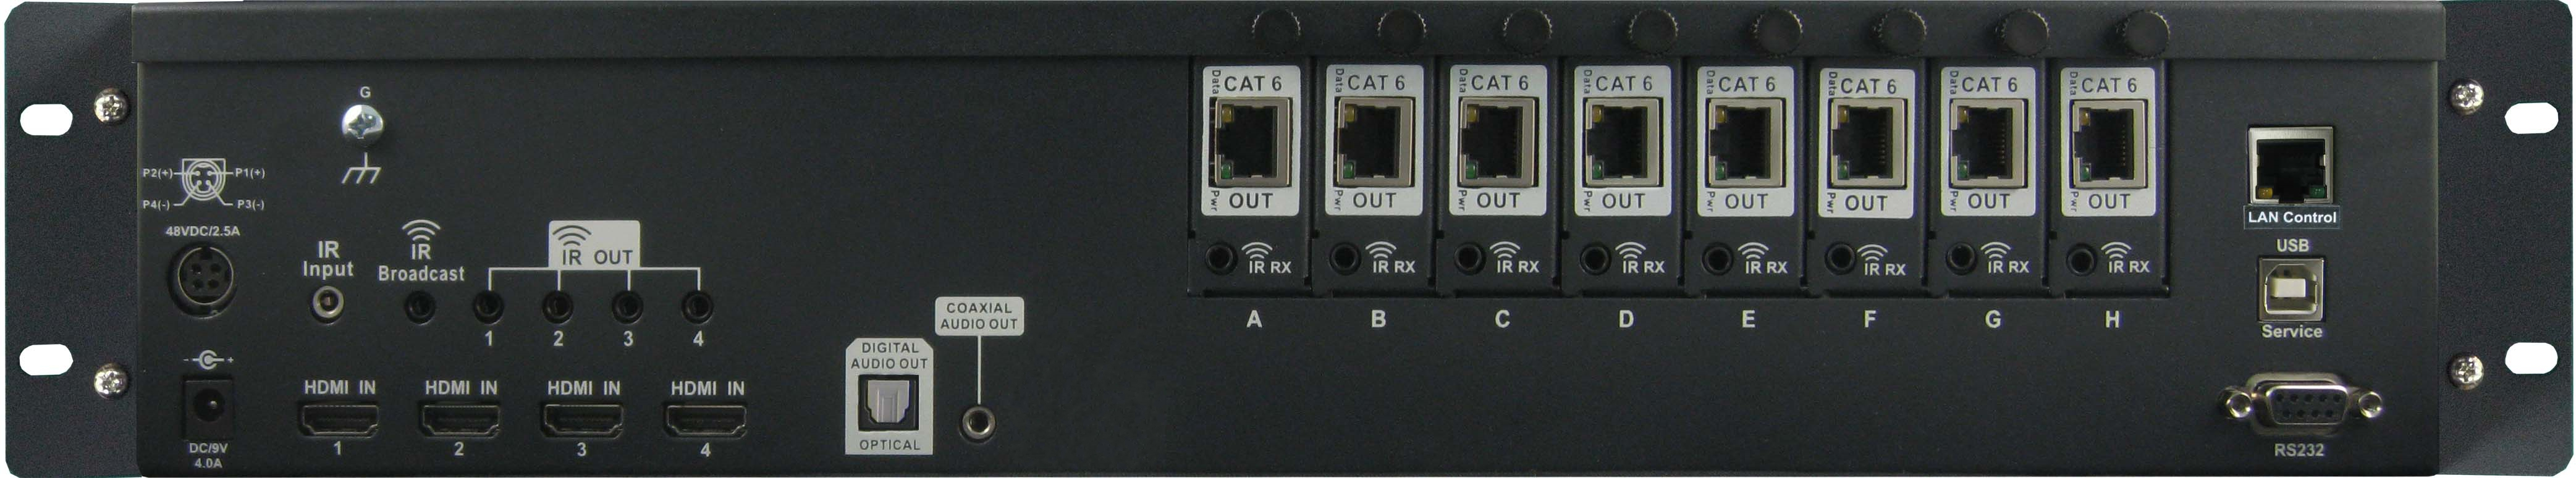 HDMI_Matrix_with_HDbaseT_outputs_back_view.png